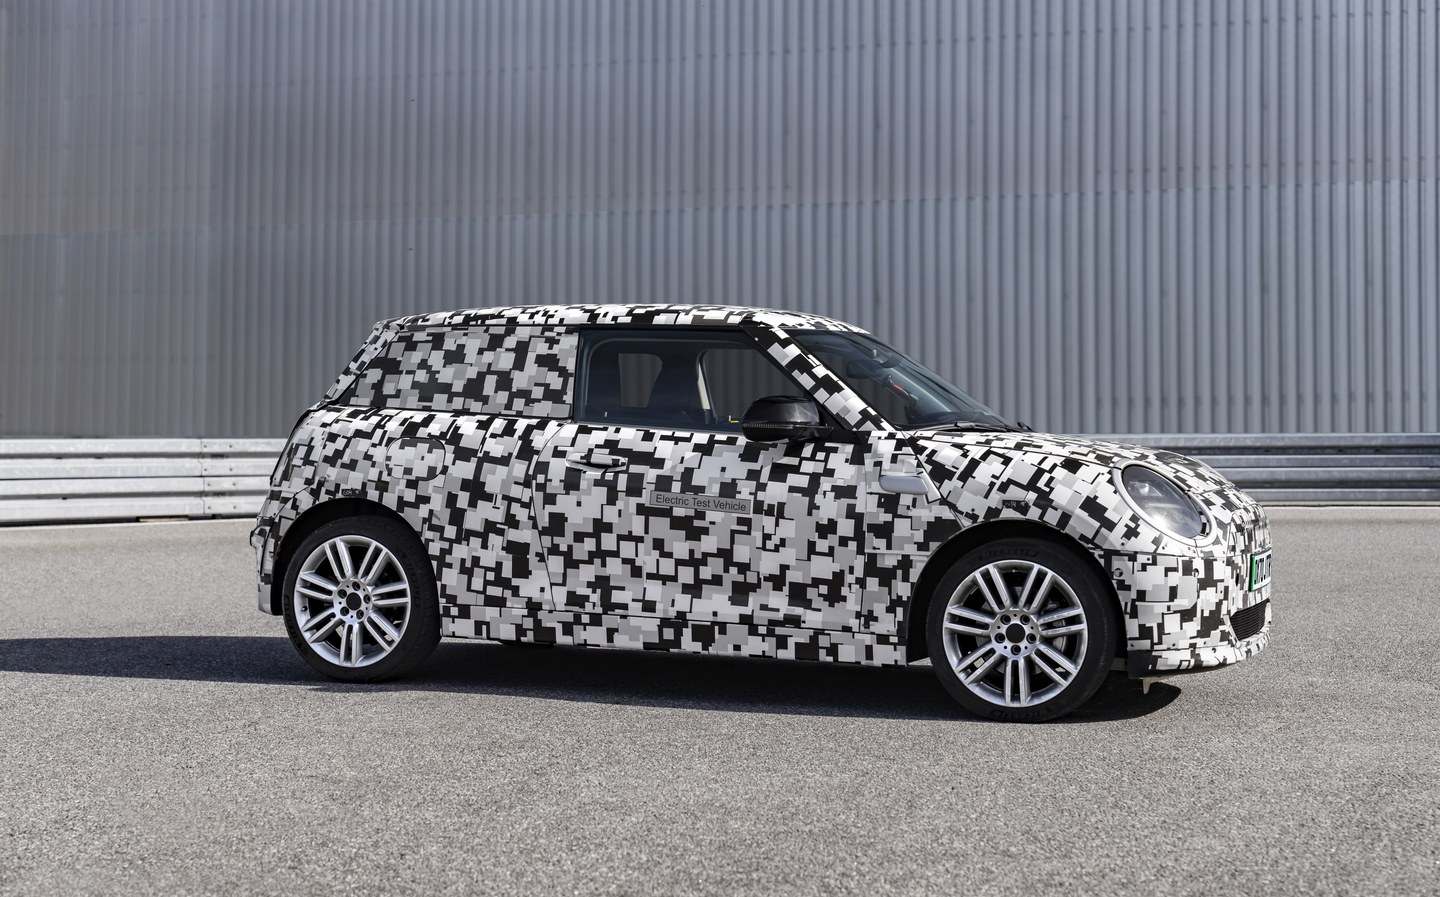 aceman, countryman, electric cars, hatch, hatchback, mini, suv (small / mid-size), larger, pure-electric mini countryman breaks cover as brand makes way for smaller crossover ev